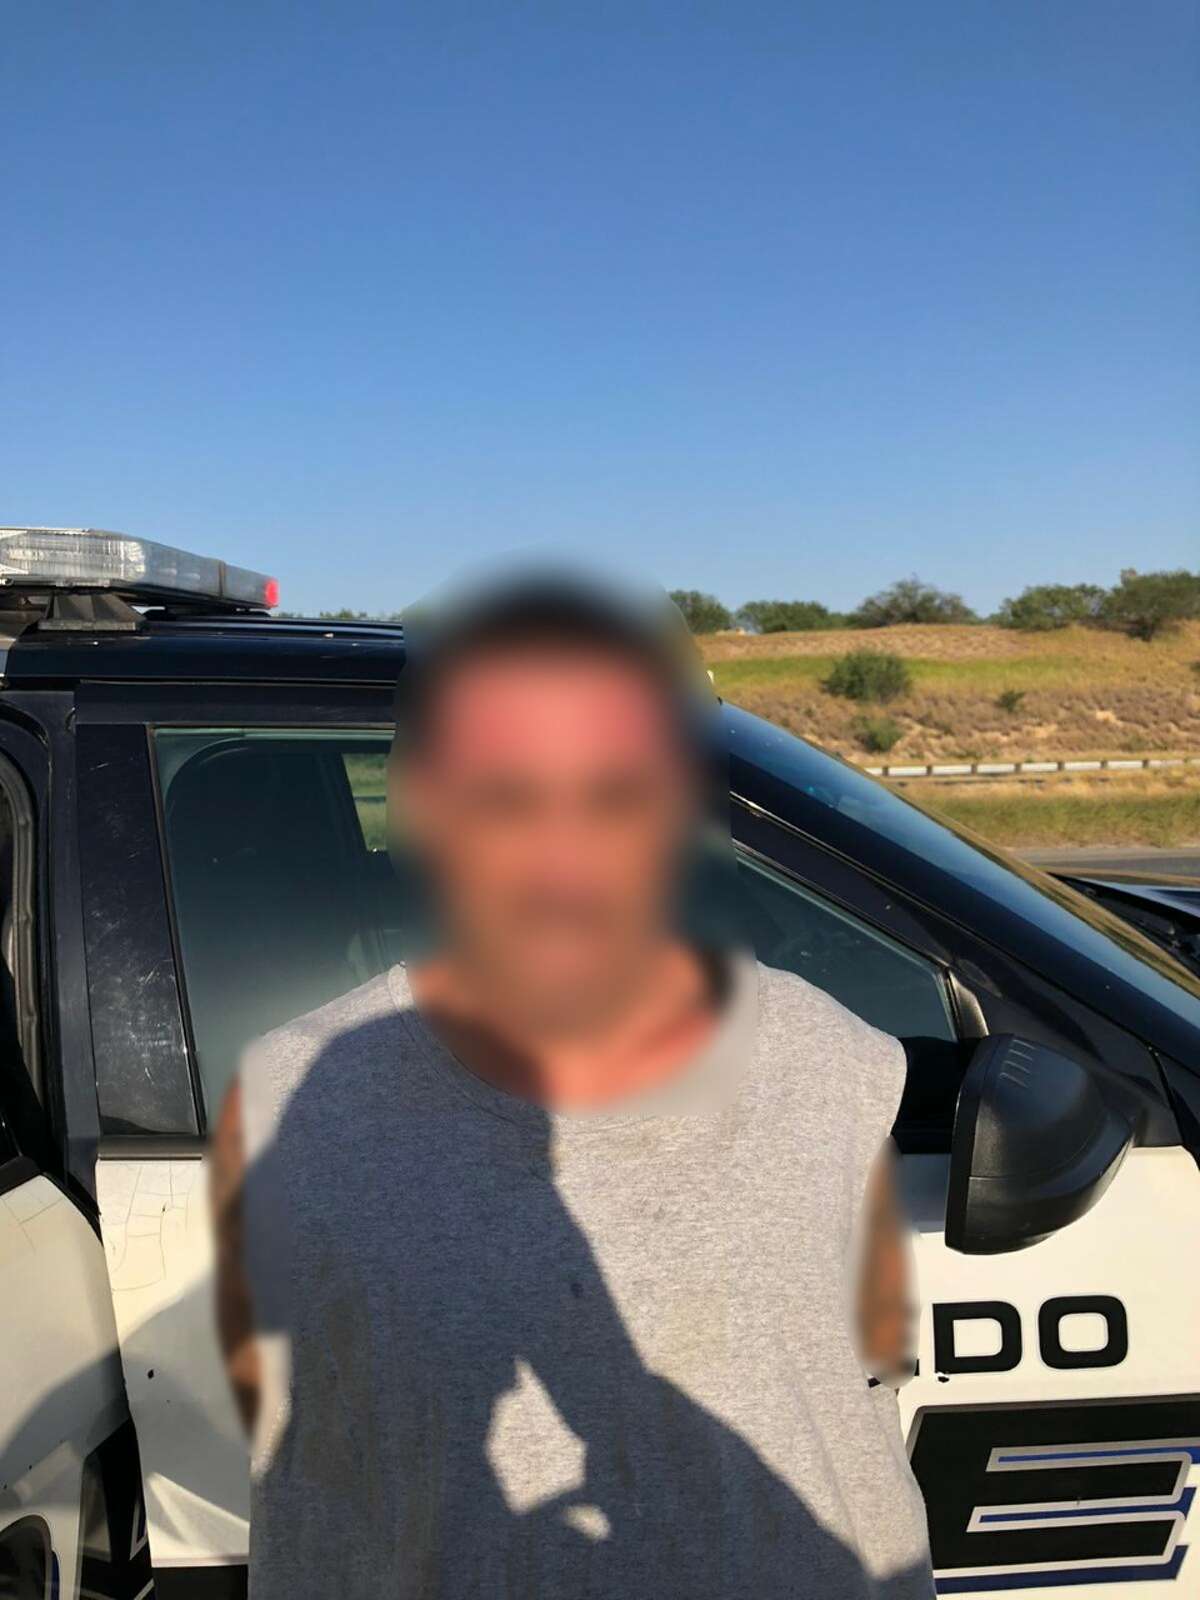 U.S. Border Patrol agents said this man led agents and Laredo police officers in a vehicle pursuit. The man was allegedly transporting immigrants who had crossed the border illegally. Authorities did not identify him.